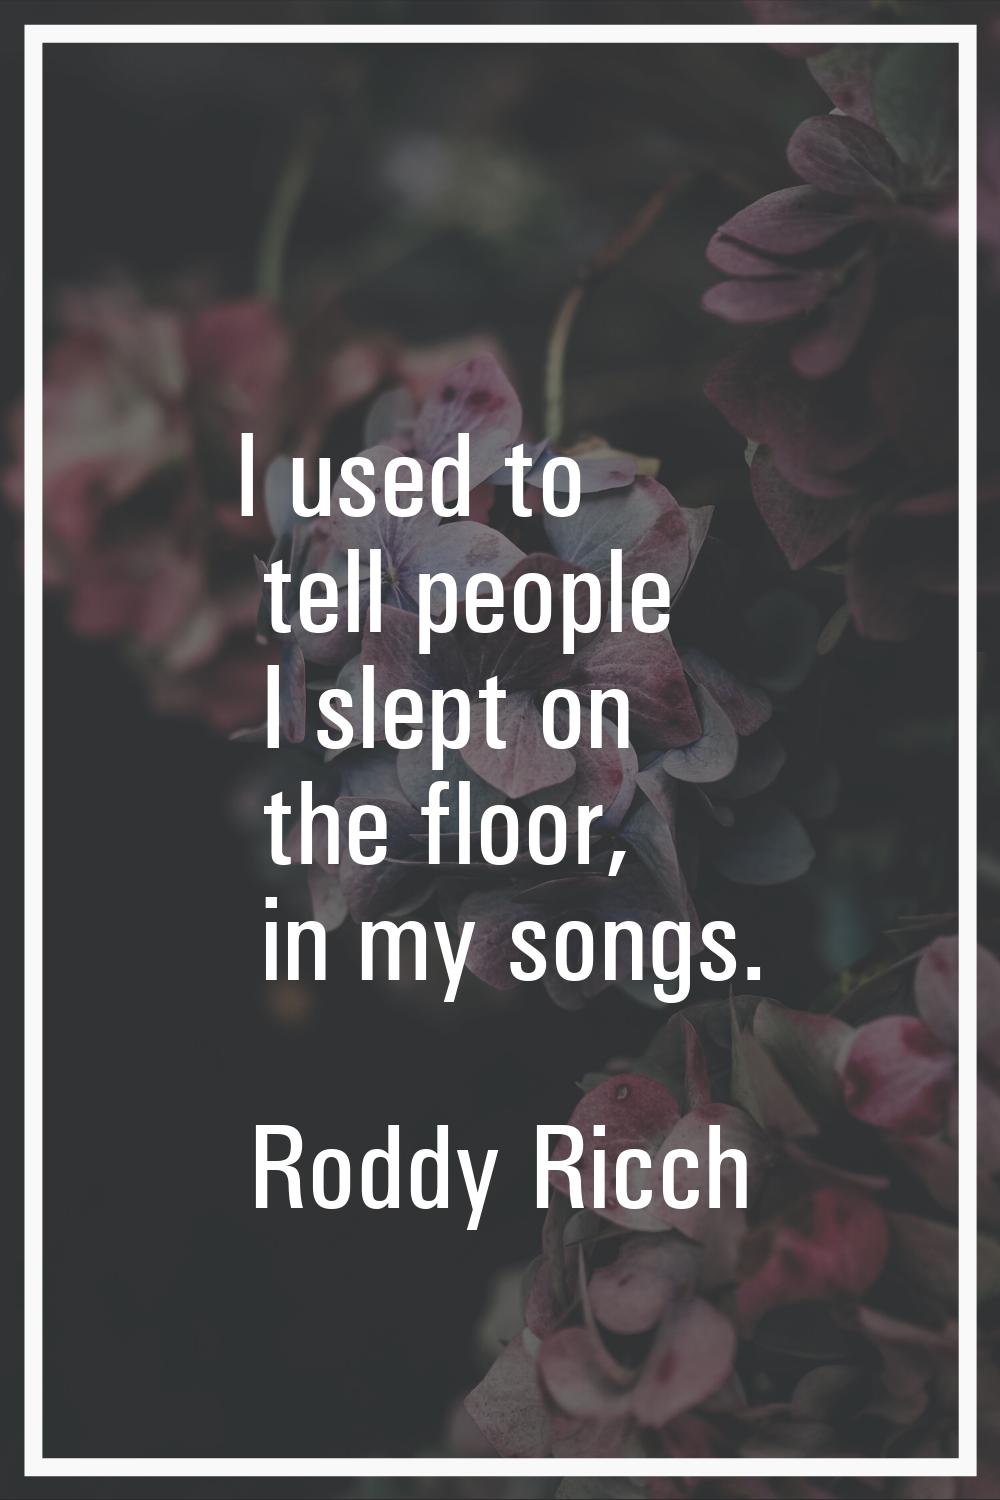 I used to tell people I slept on the floor, in my songs.